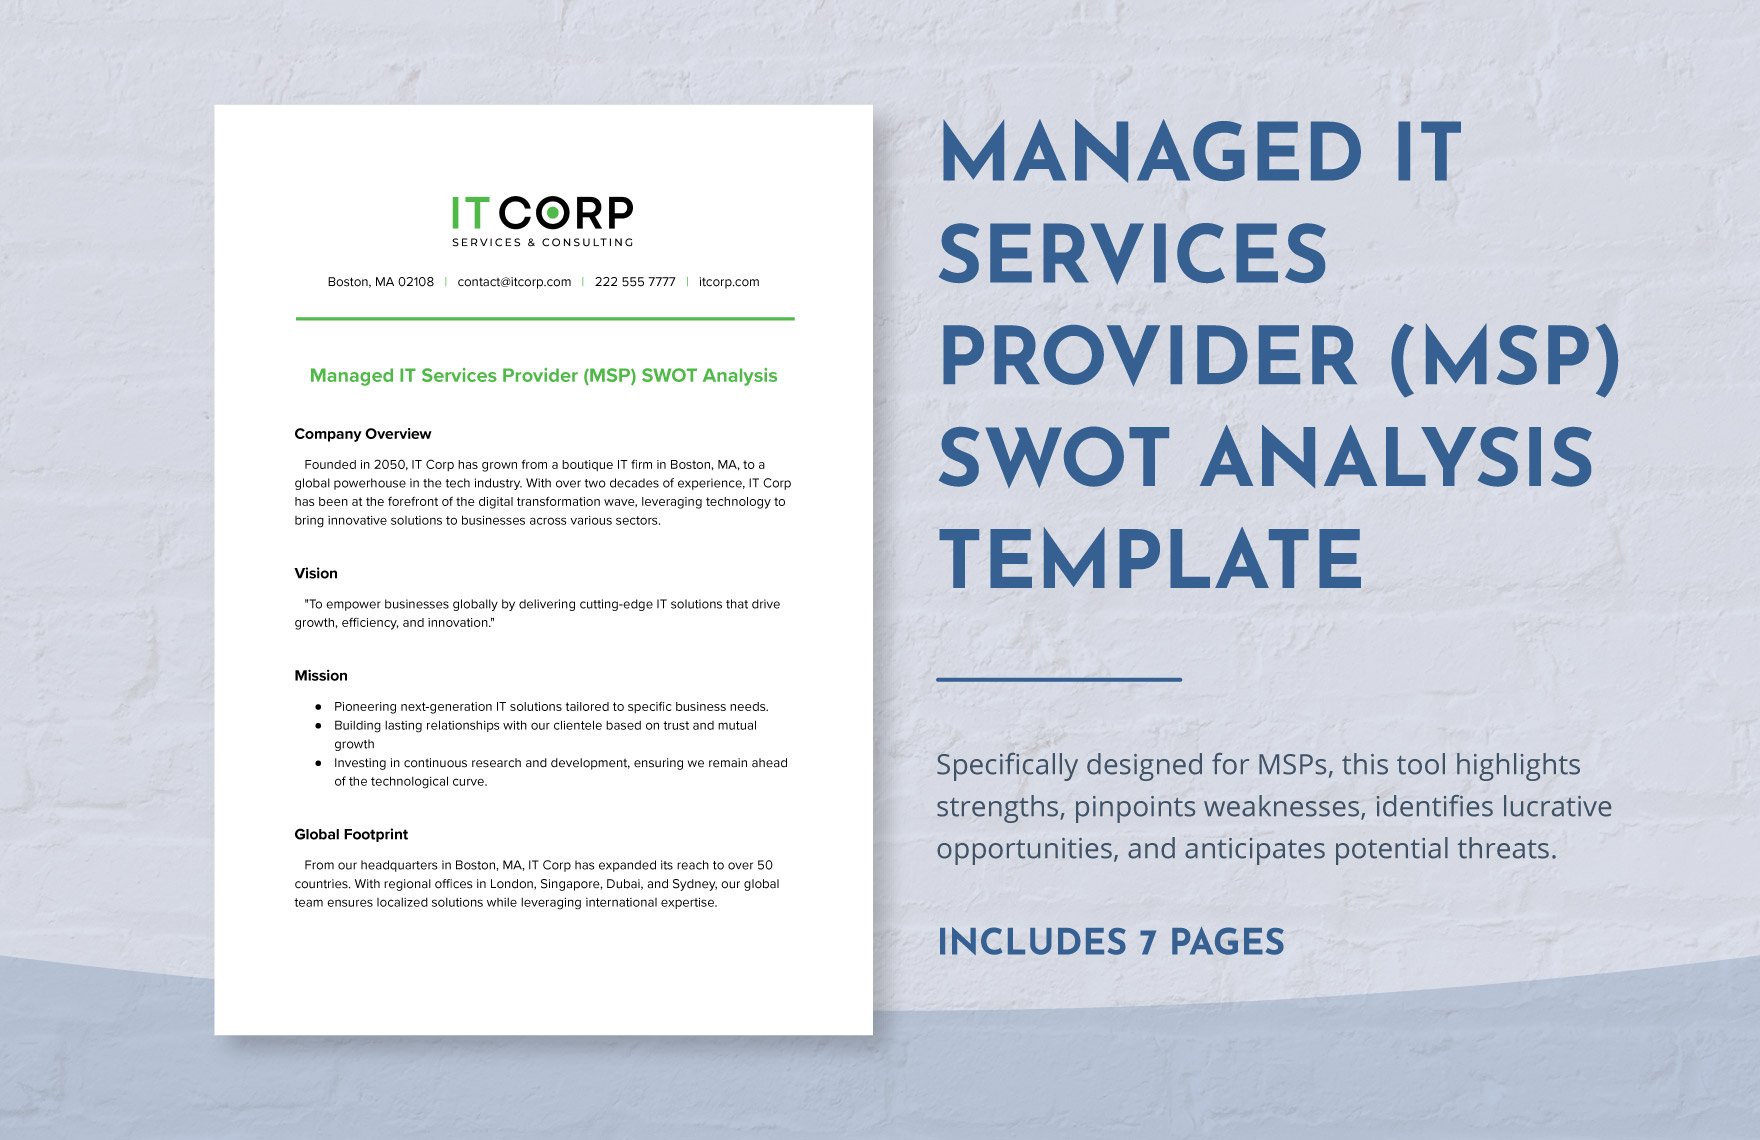 Managed IT Services Provider (MSP) SWOT Analysis Template in Word, Google Docs, PDF